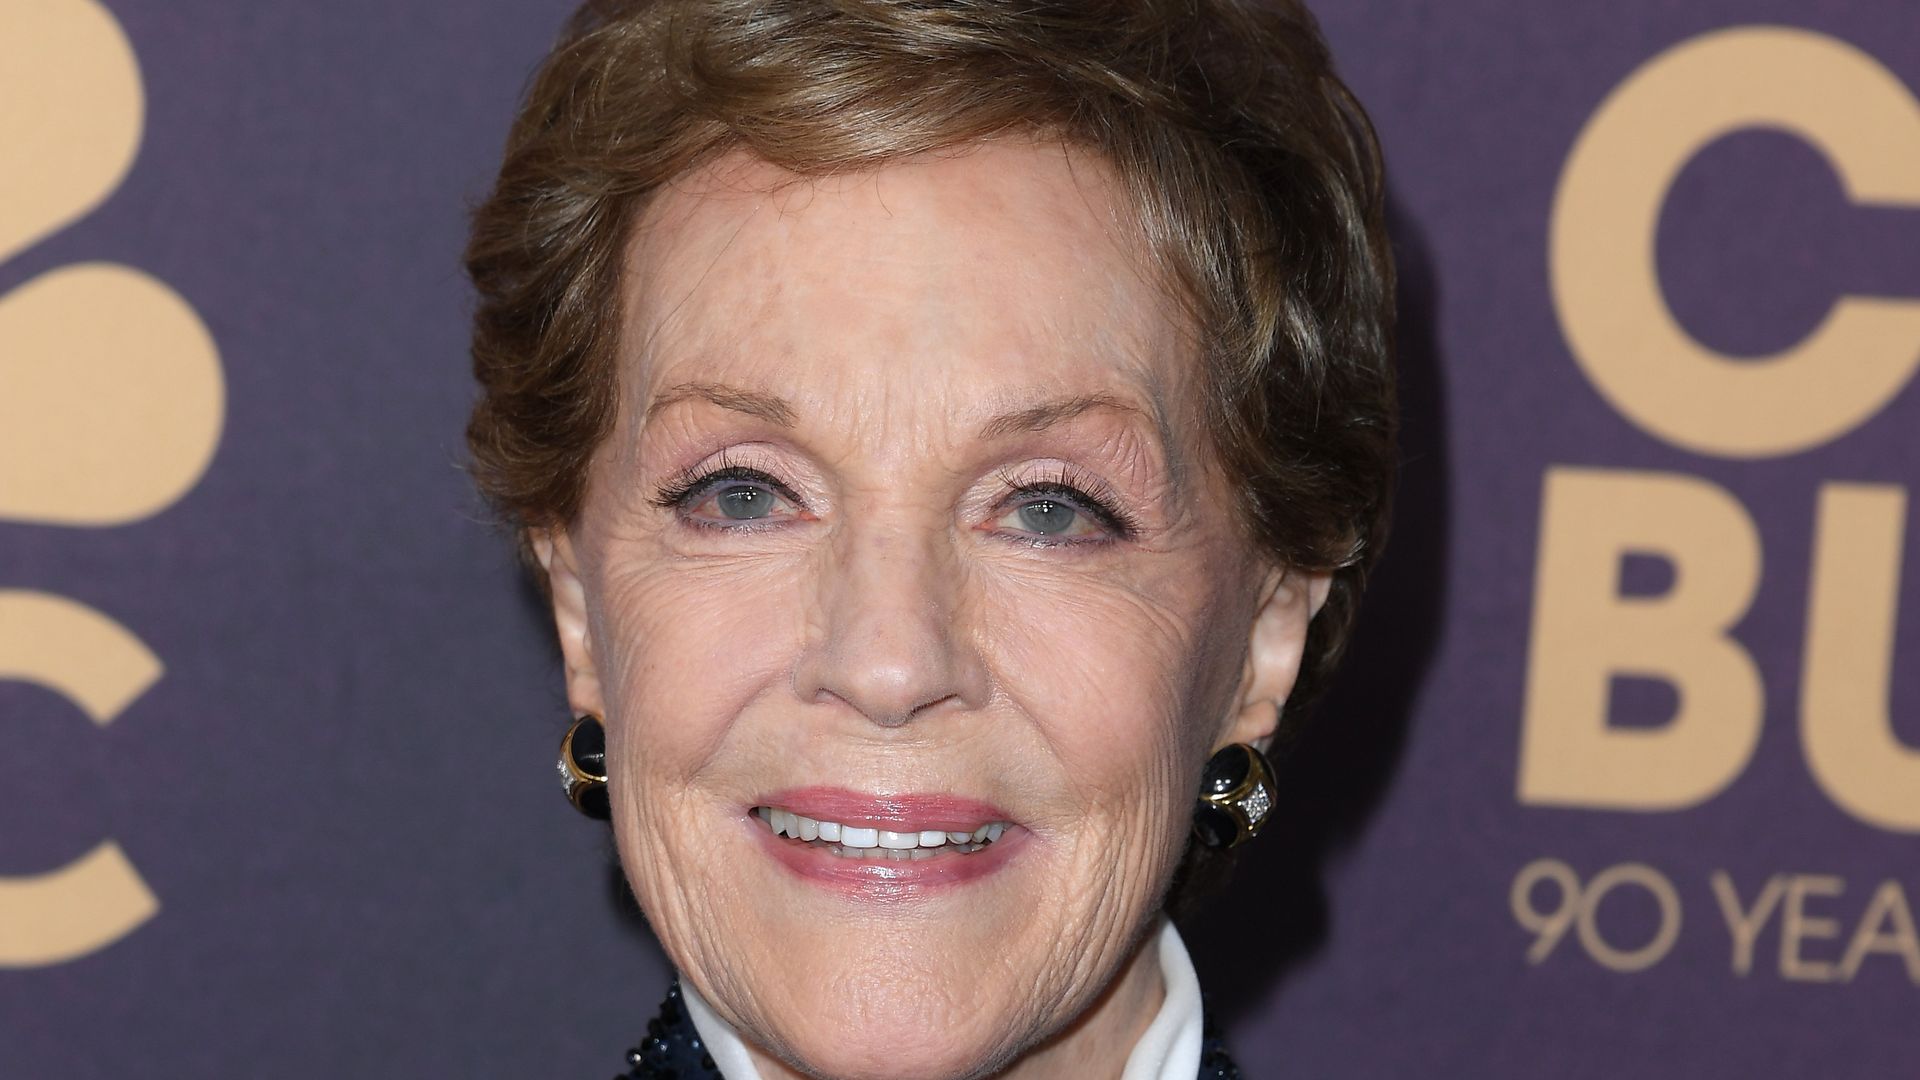 Julie Andrews uses walking stick as she makes rare public appearance following fan concerns